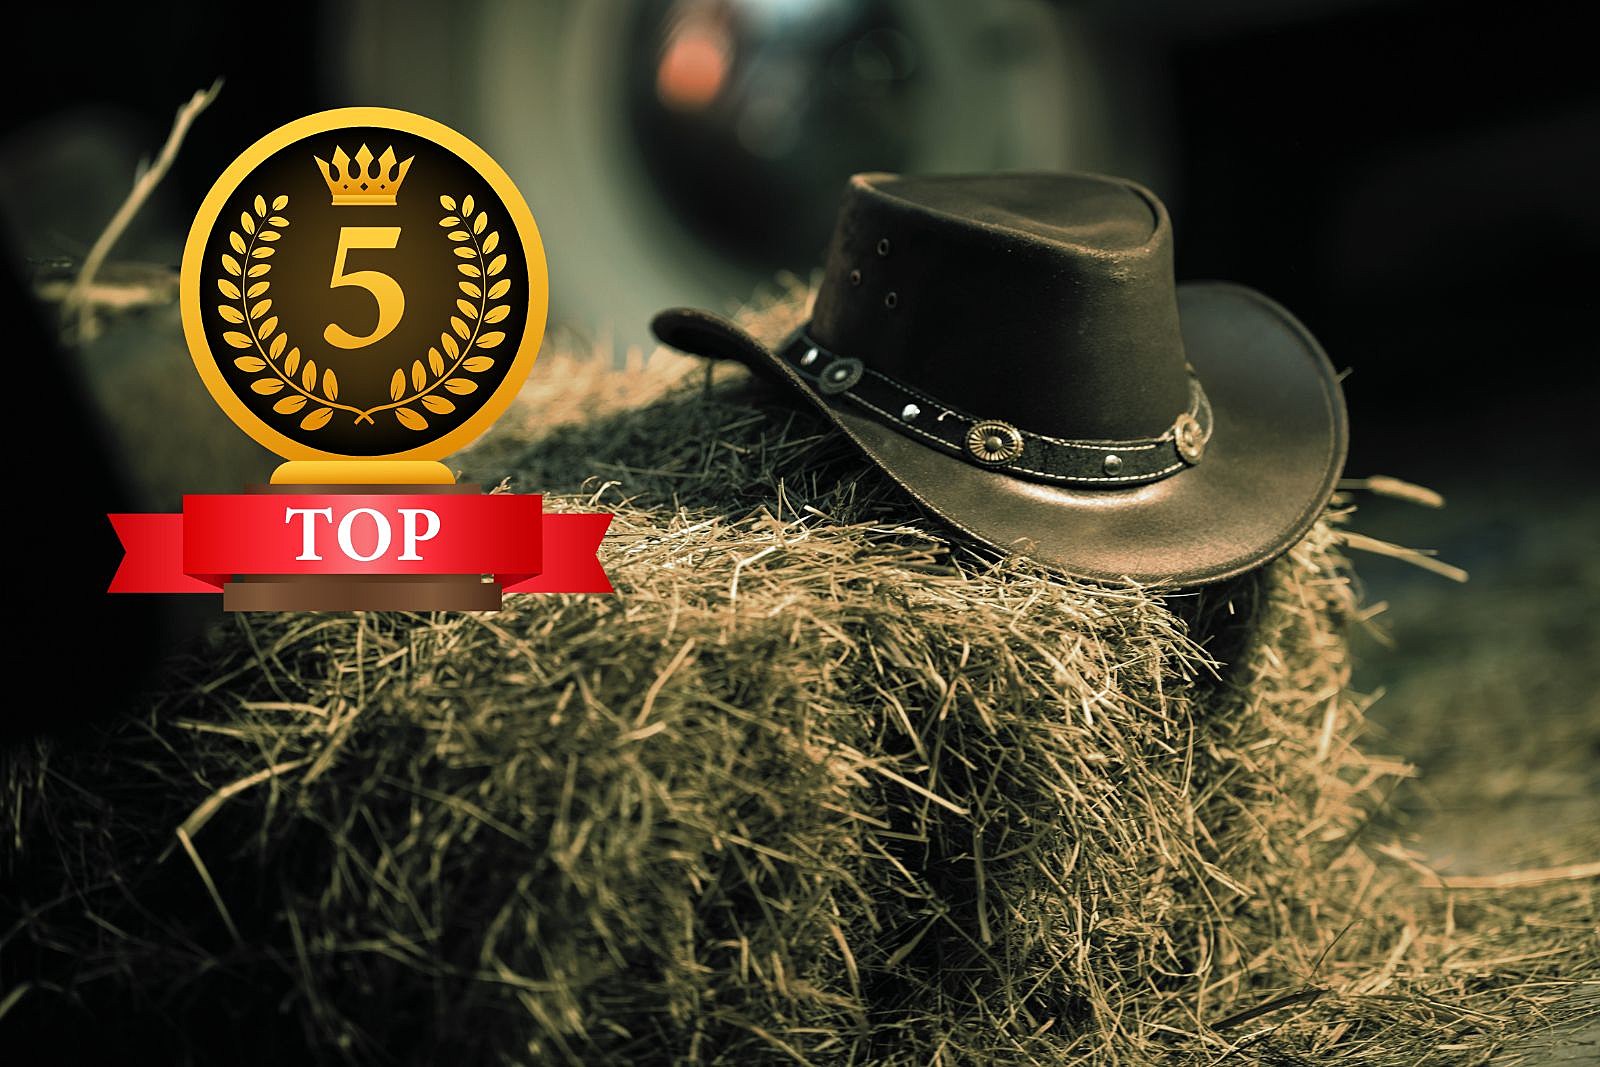 Do You Agree These Are The 5 Top Cowboy Hat Brands In Wyoming?